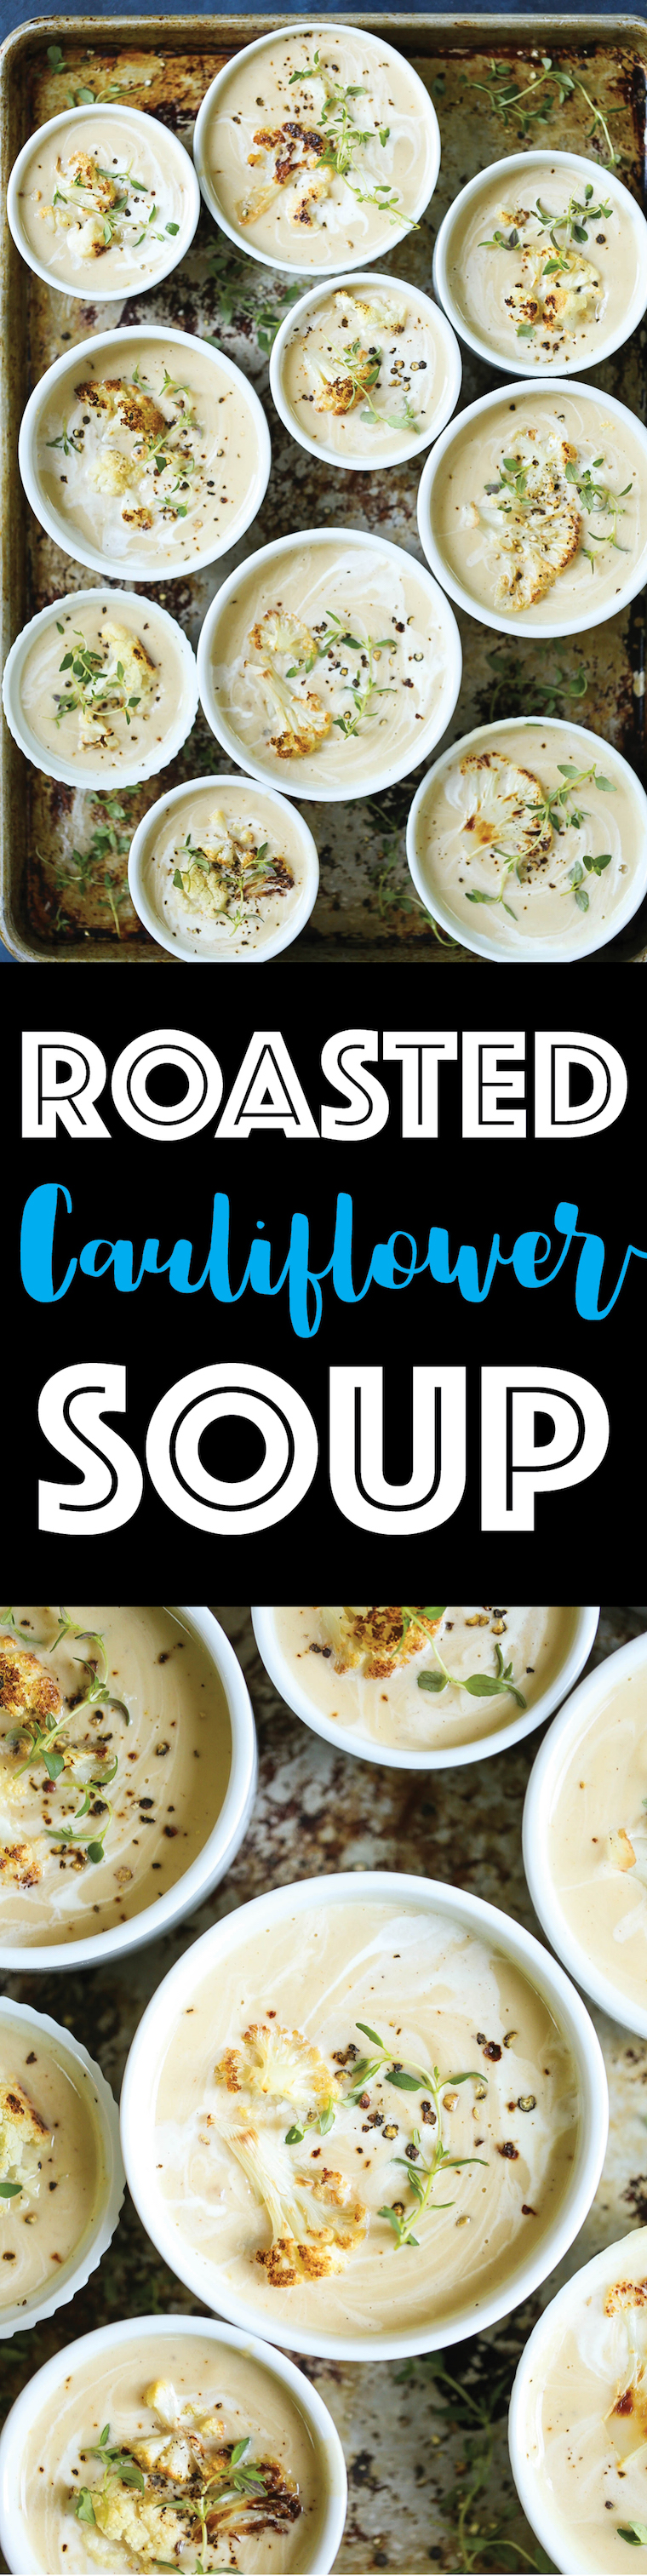 Roasted Cauliflower Soup - You will not believe that this is actually cauliflower soup! It is so creamy, so comforting, and packed with so much flavor with healthier ingredients!